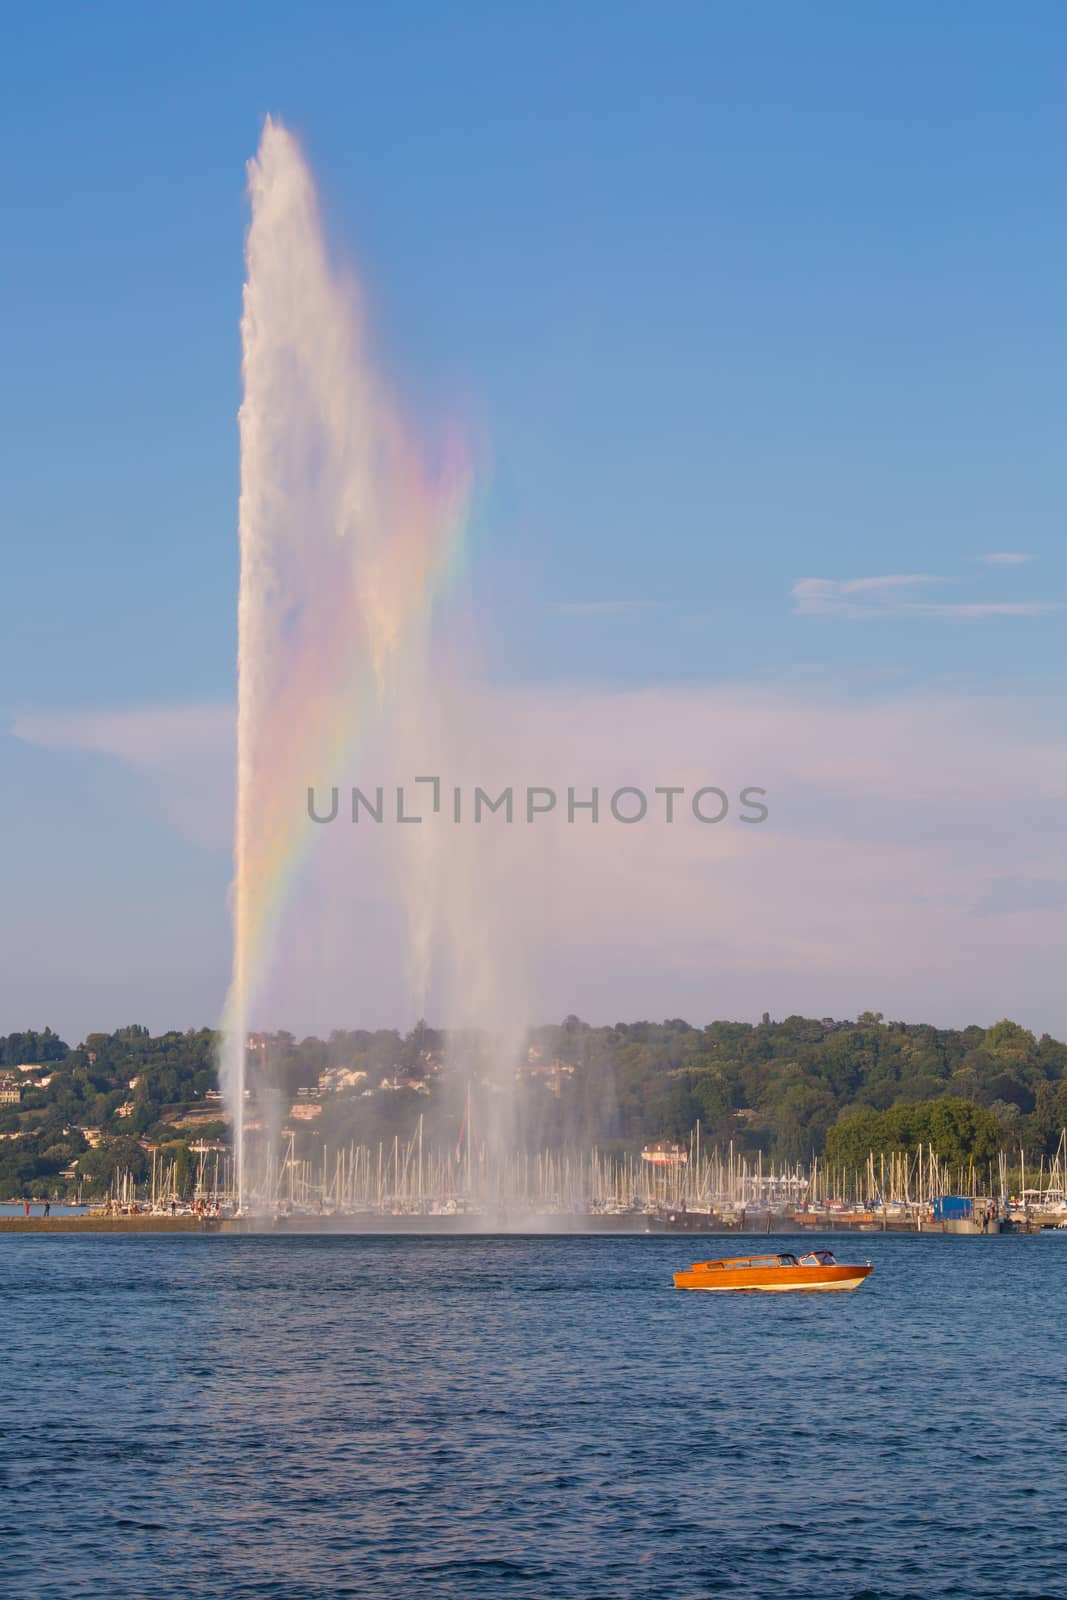 The world famous Geneva Fountain, at certain hours a small section of rainbow is visible in the fountain